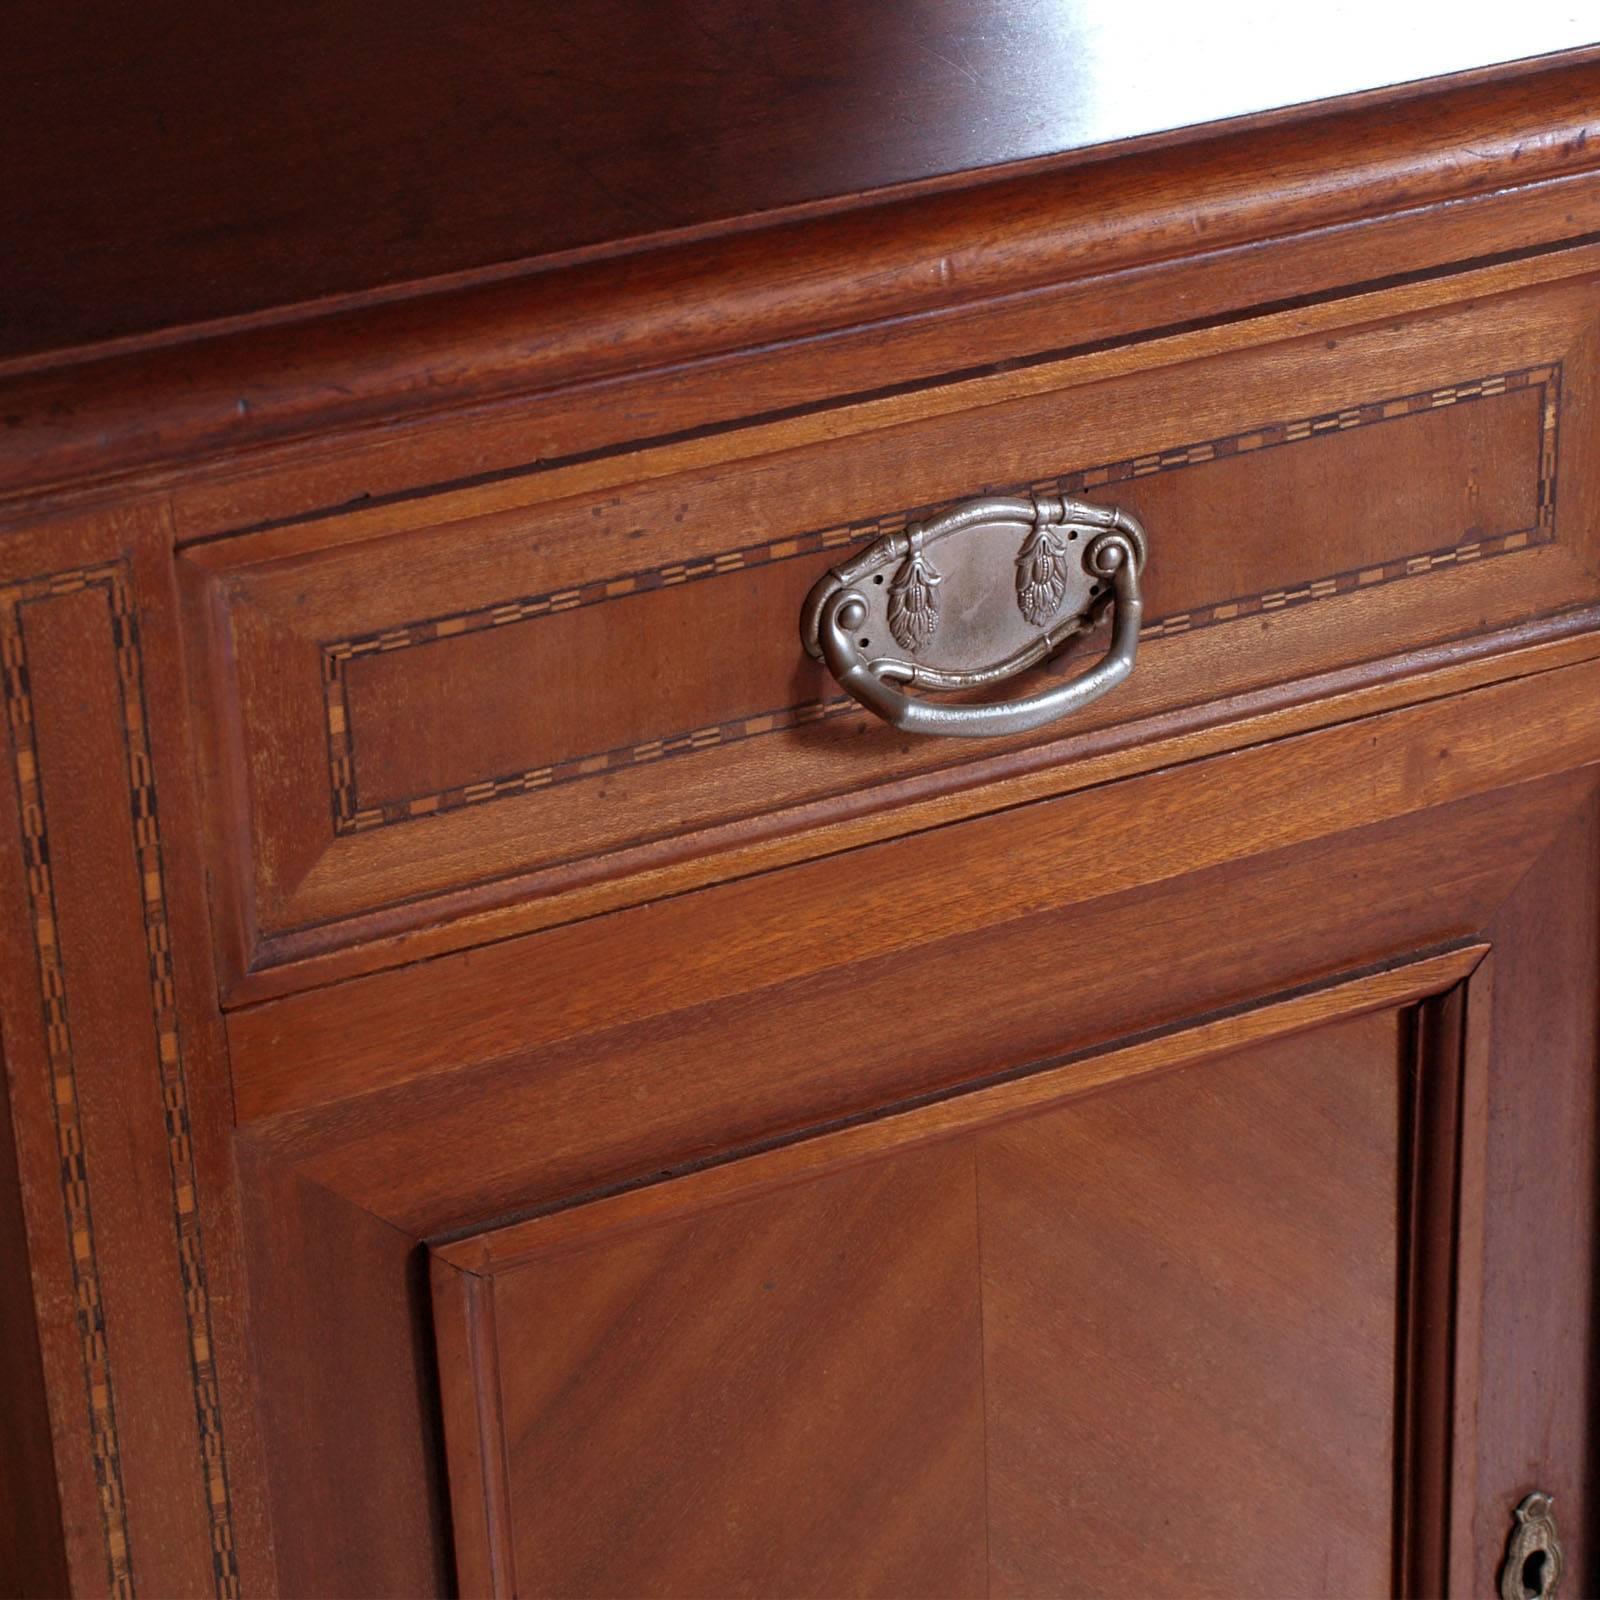 Italian Early 20th Century Credenza Sideboard Belle Epoque, Walnut, Mahogany Maple Inlay For Sale